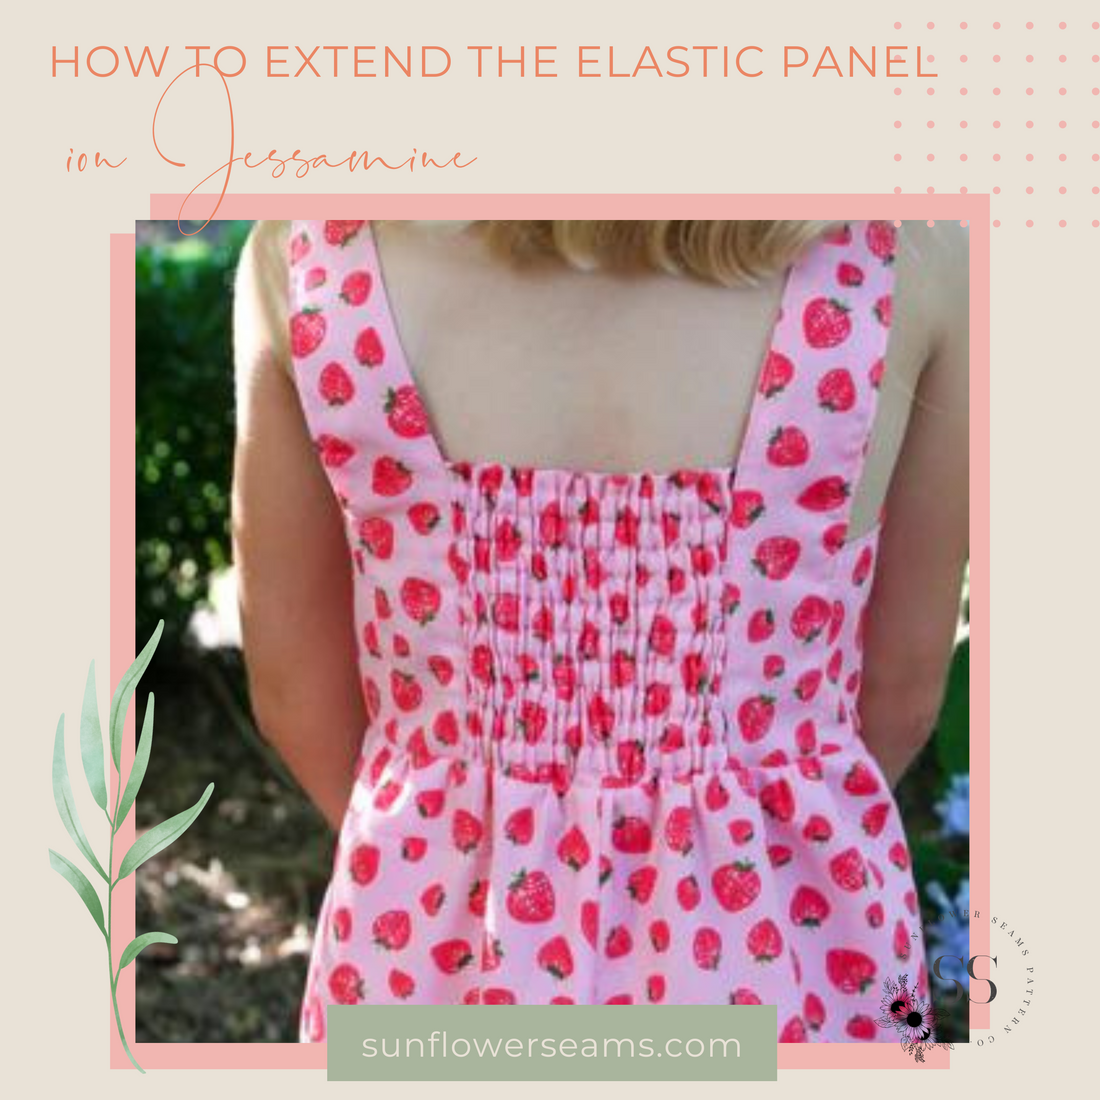 How to Extend the Elastic Panel on Jessamine and remove the tie back {A Tutorial}